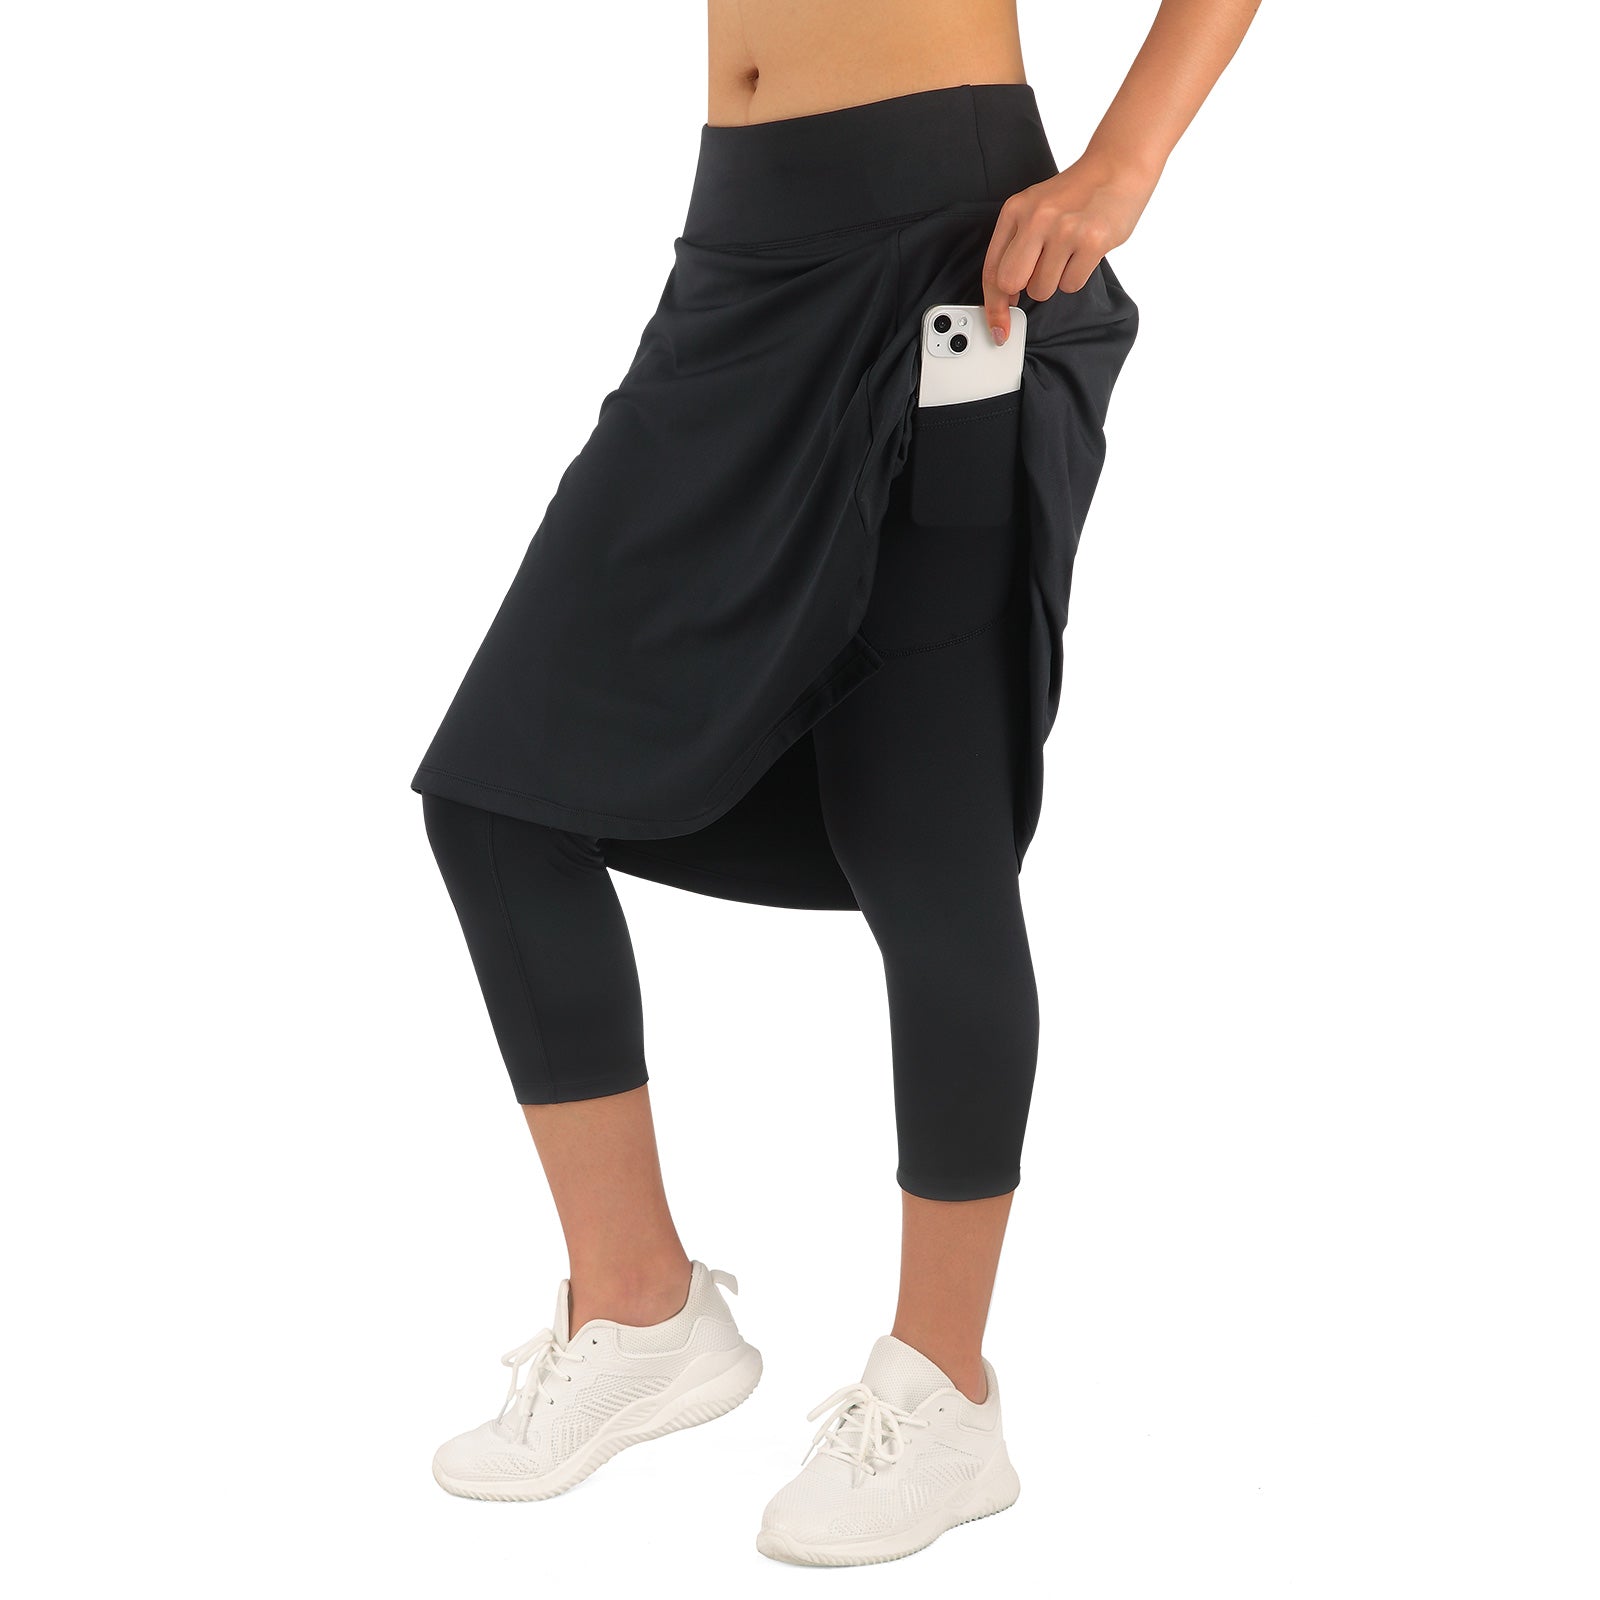  ANIVIVO Skirted Legging for Women, Yoga Legging with Skirts  &Women Tennis Leggings Clothes(Black,XS) : Clothing, Shoes & Jewelry